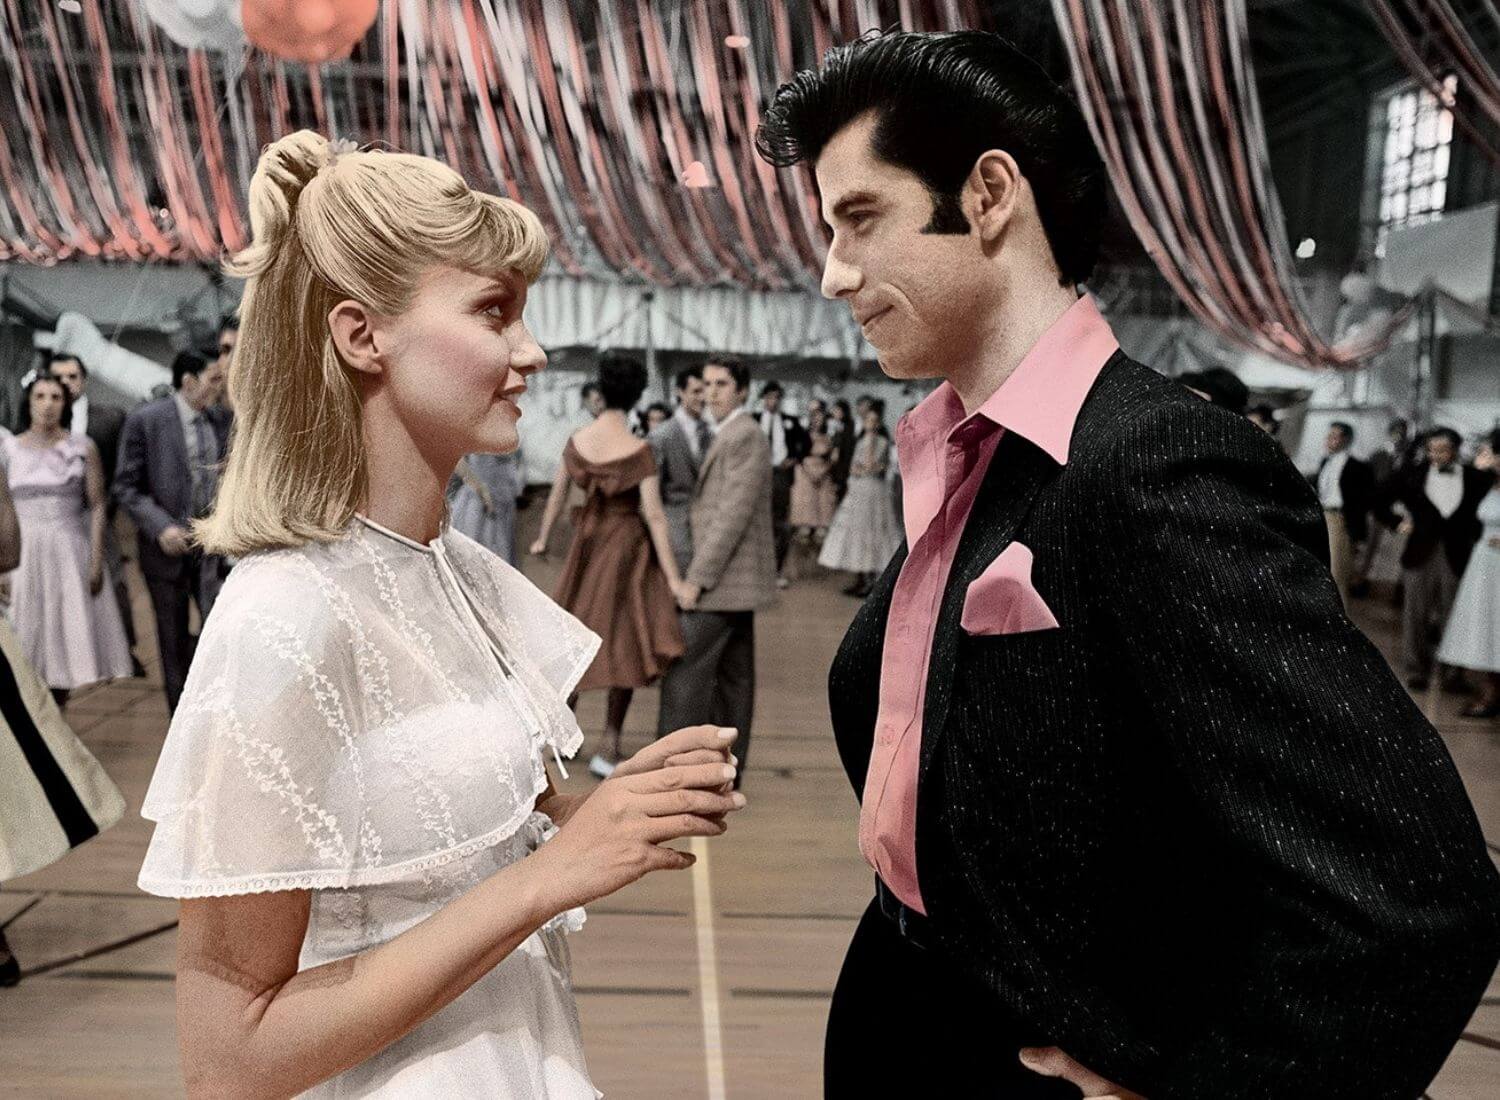 5 Weird Facts About Grease, The Movie